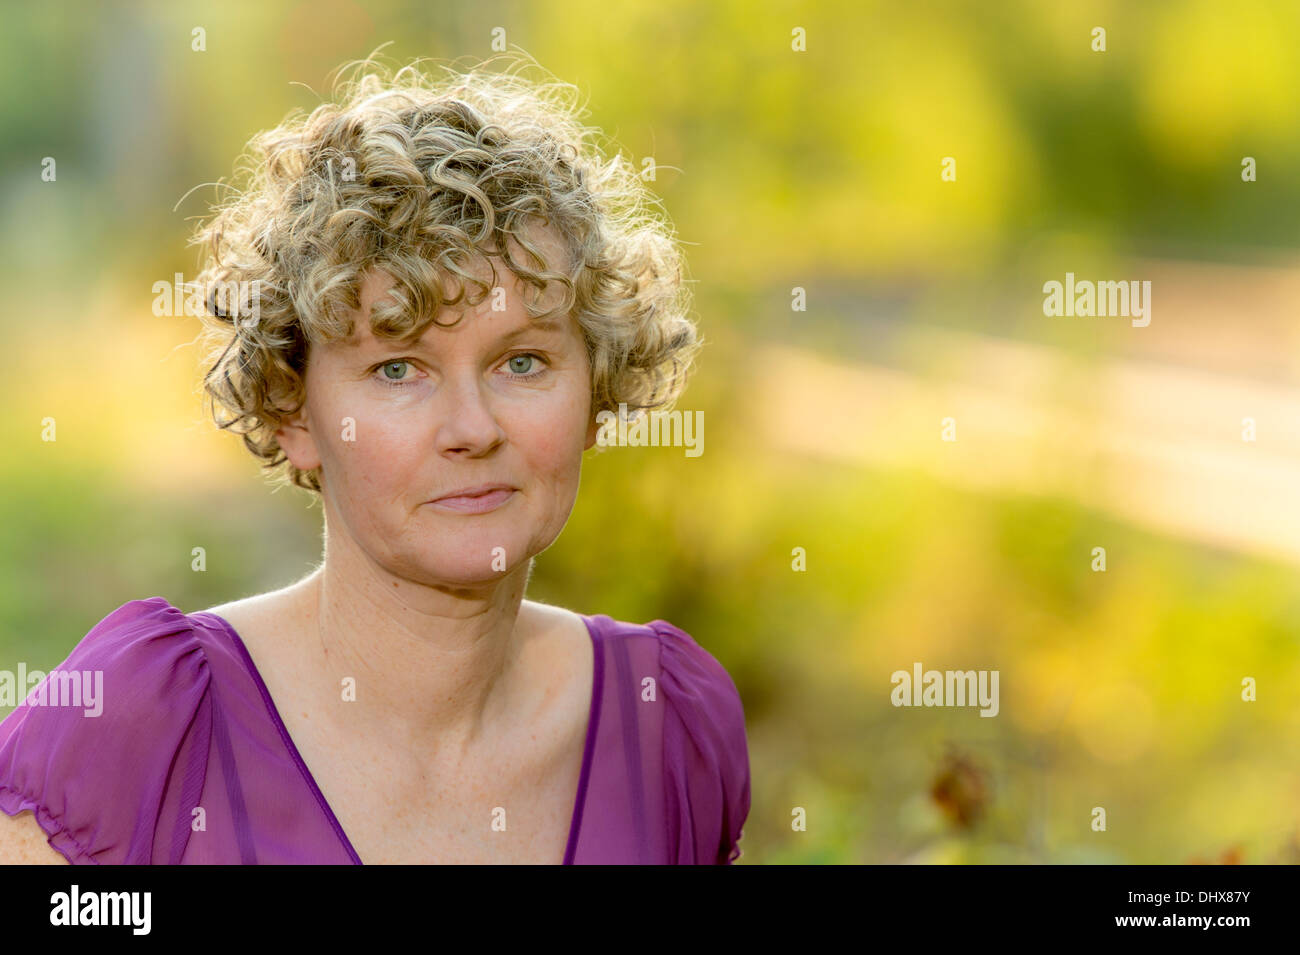 Woman Middle Aged Curly Hair During Sunset Stock Photo